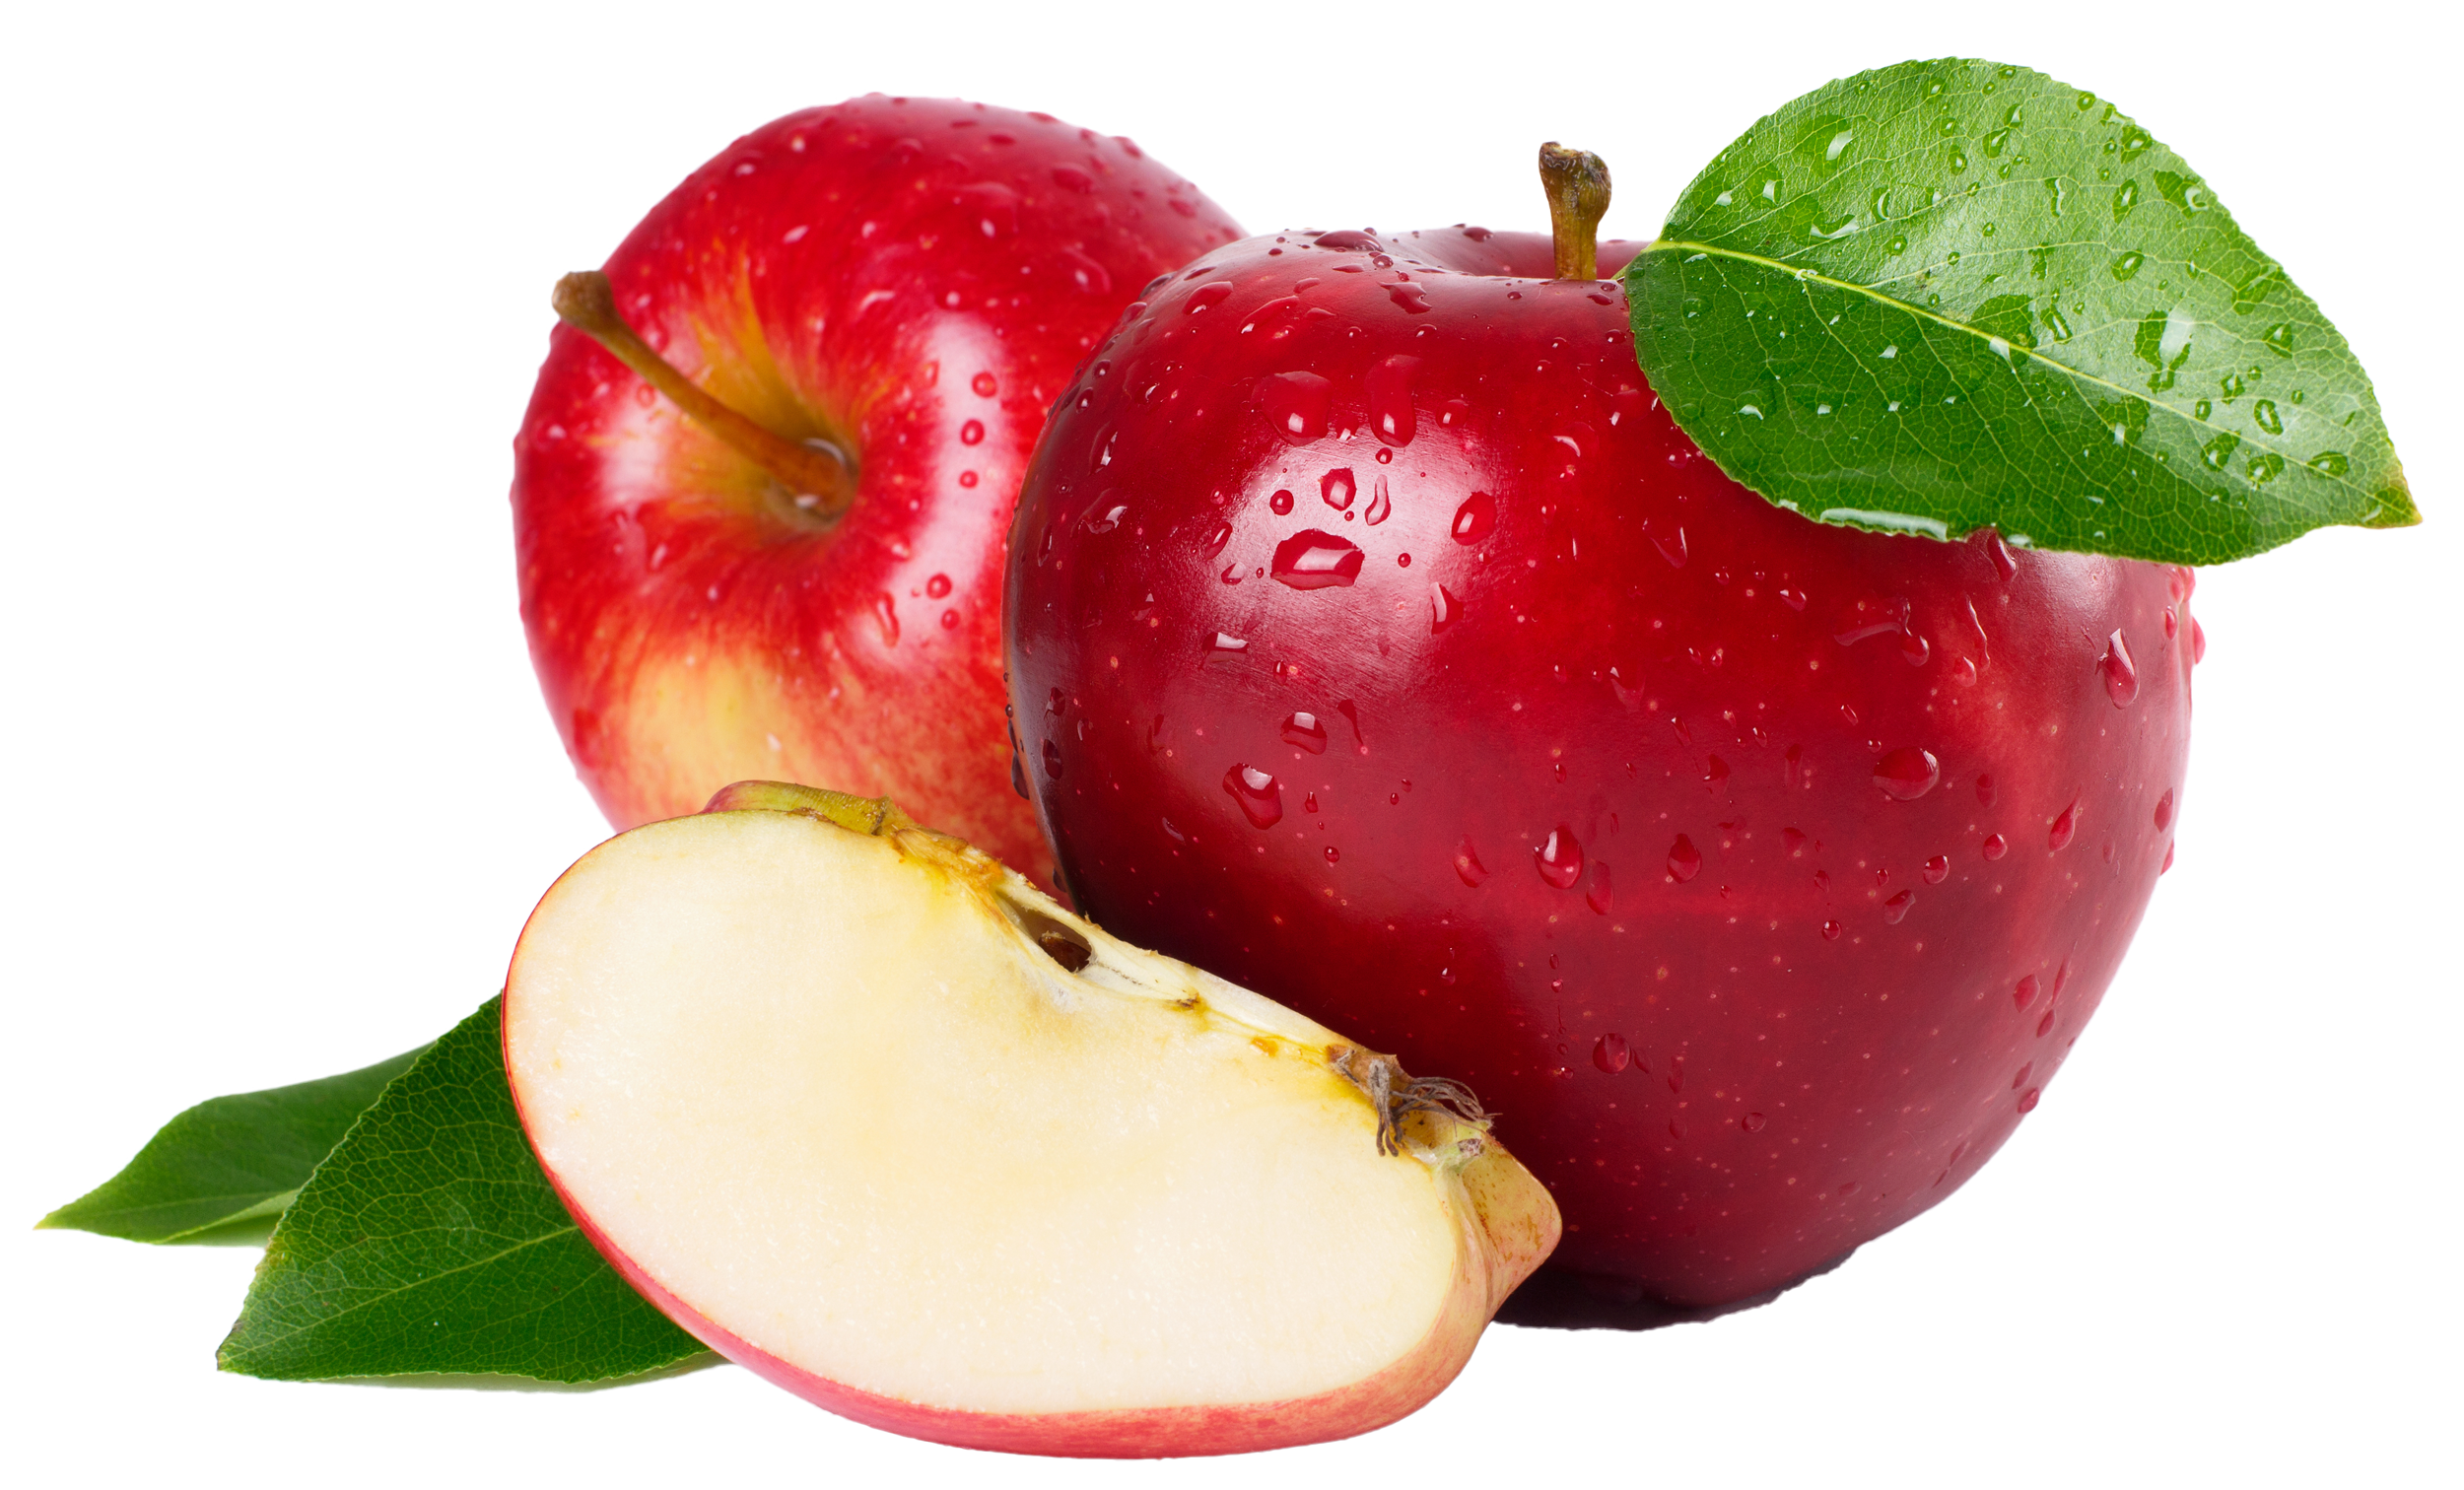 Feast clipart nutritious food. Large red apples png